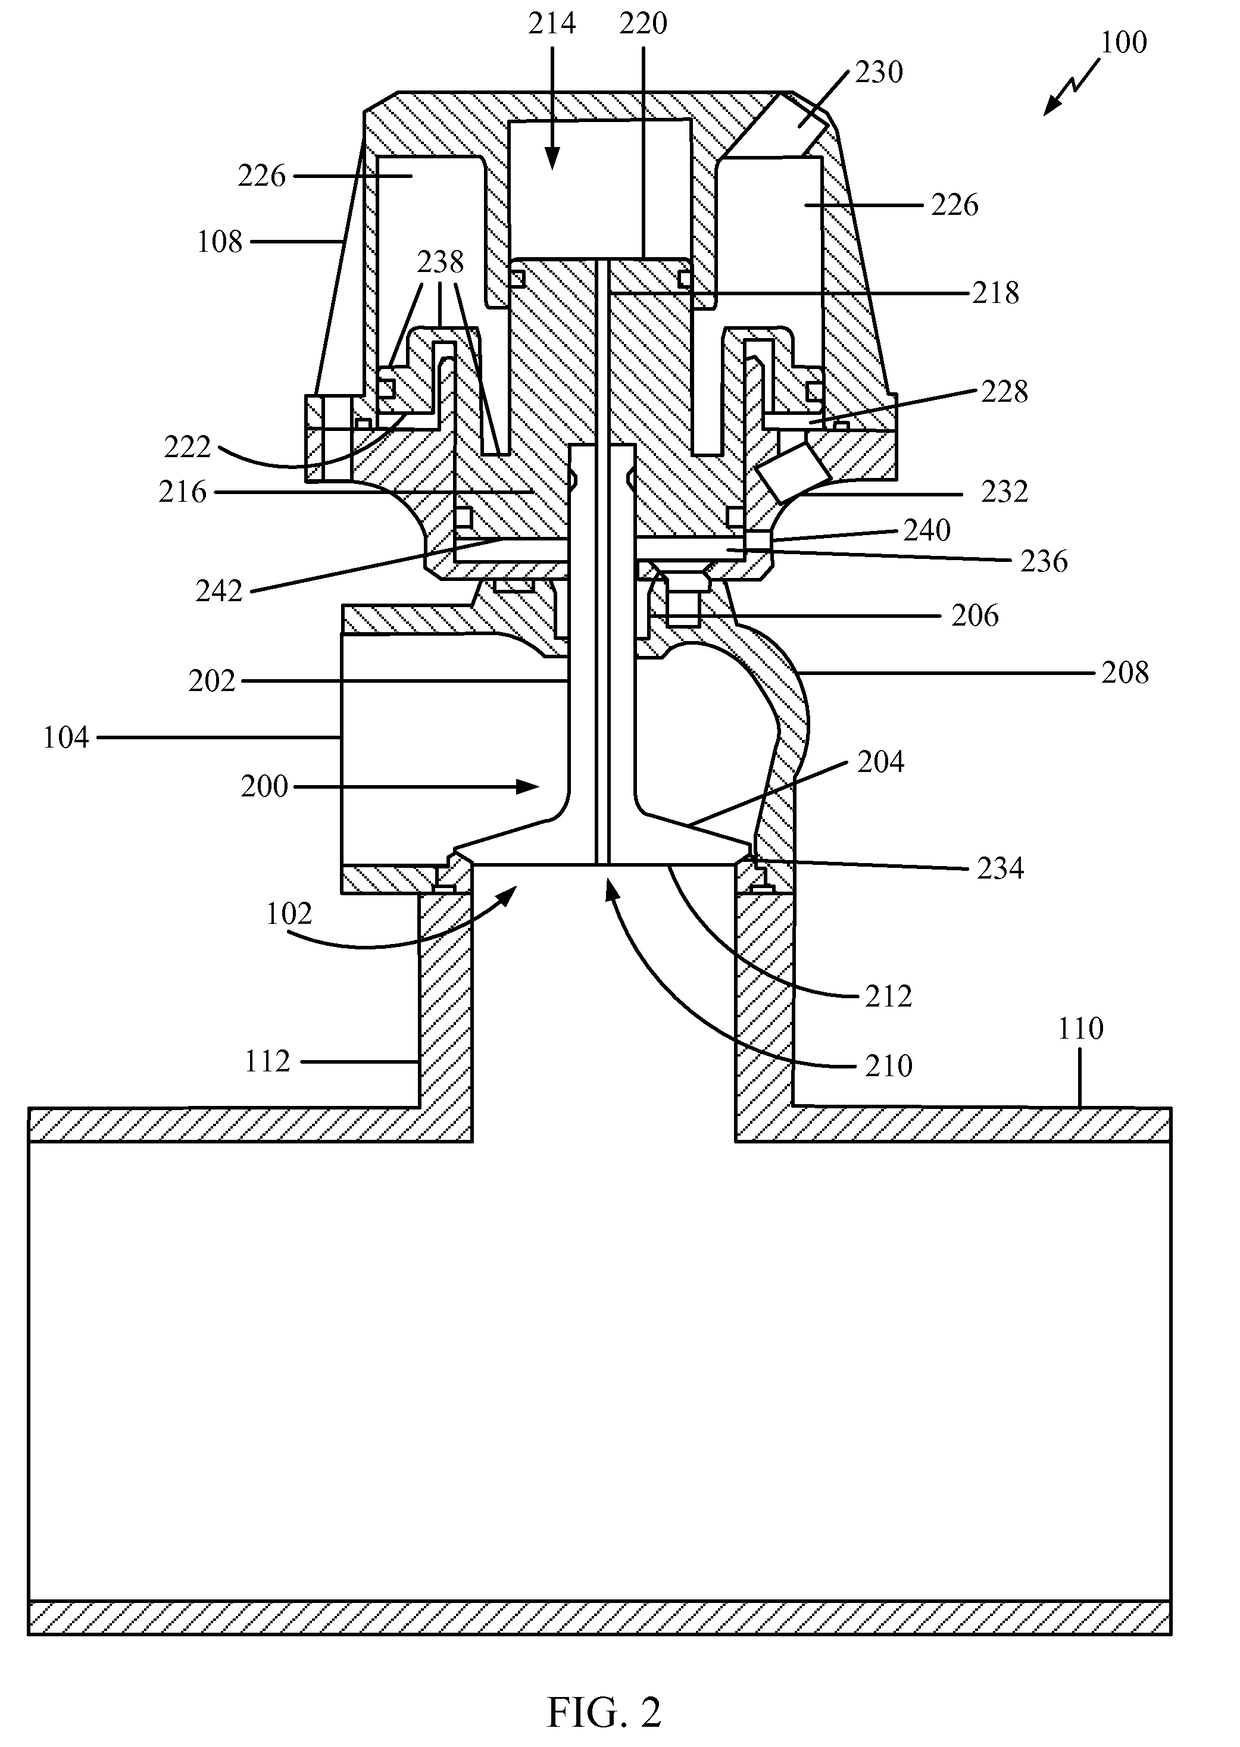 Counter-biased valve and actuator assembly